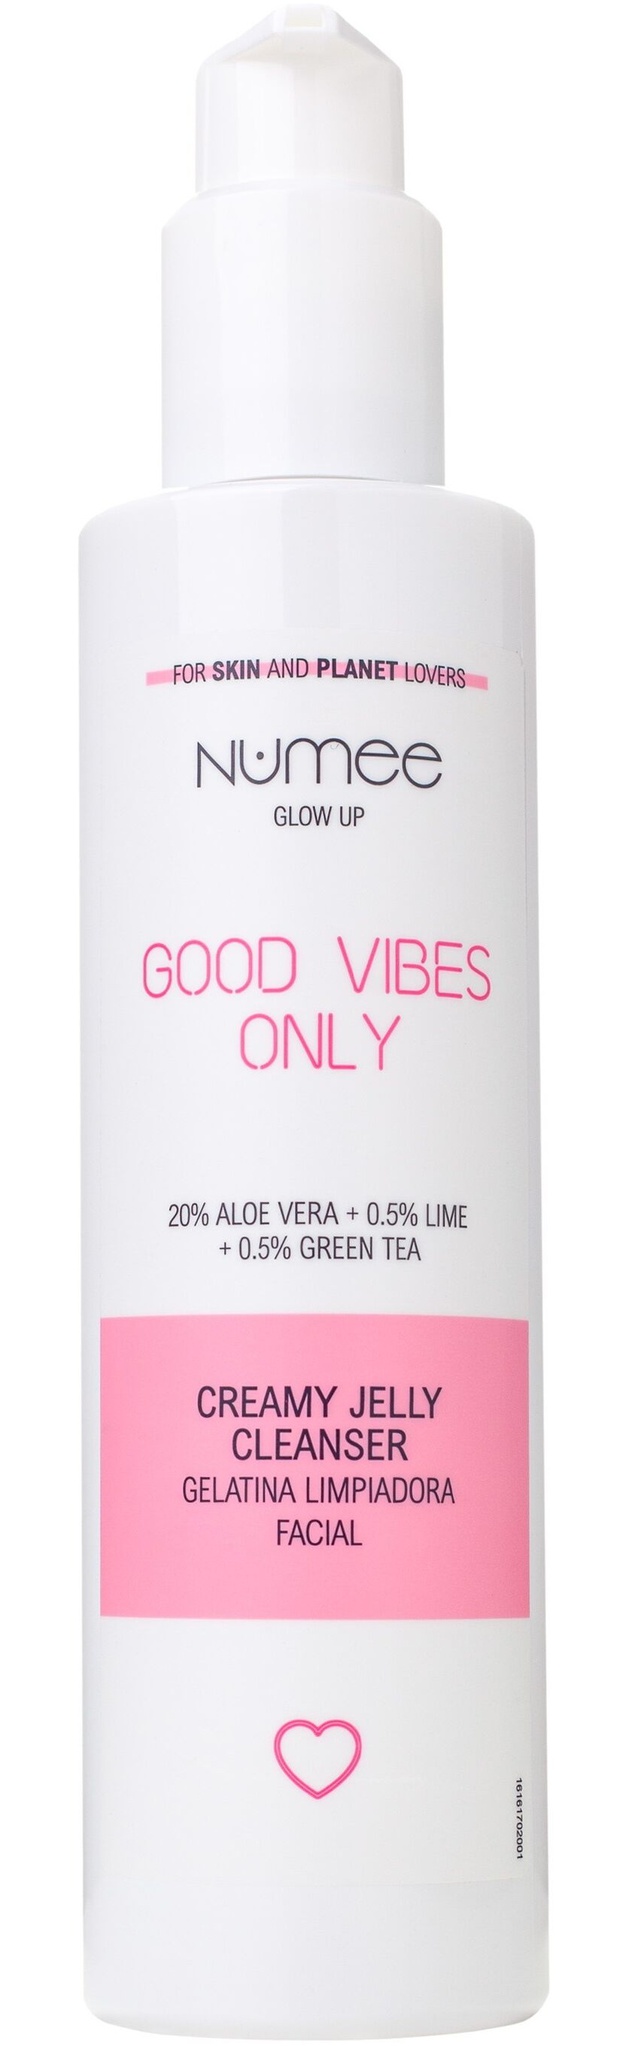 Numee Glow Up Good Vibes Only Creamy Jelly Cleanser